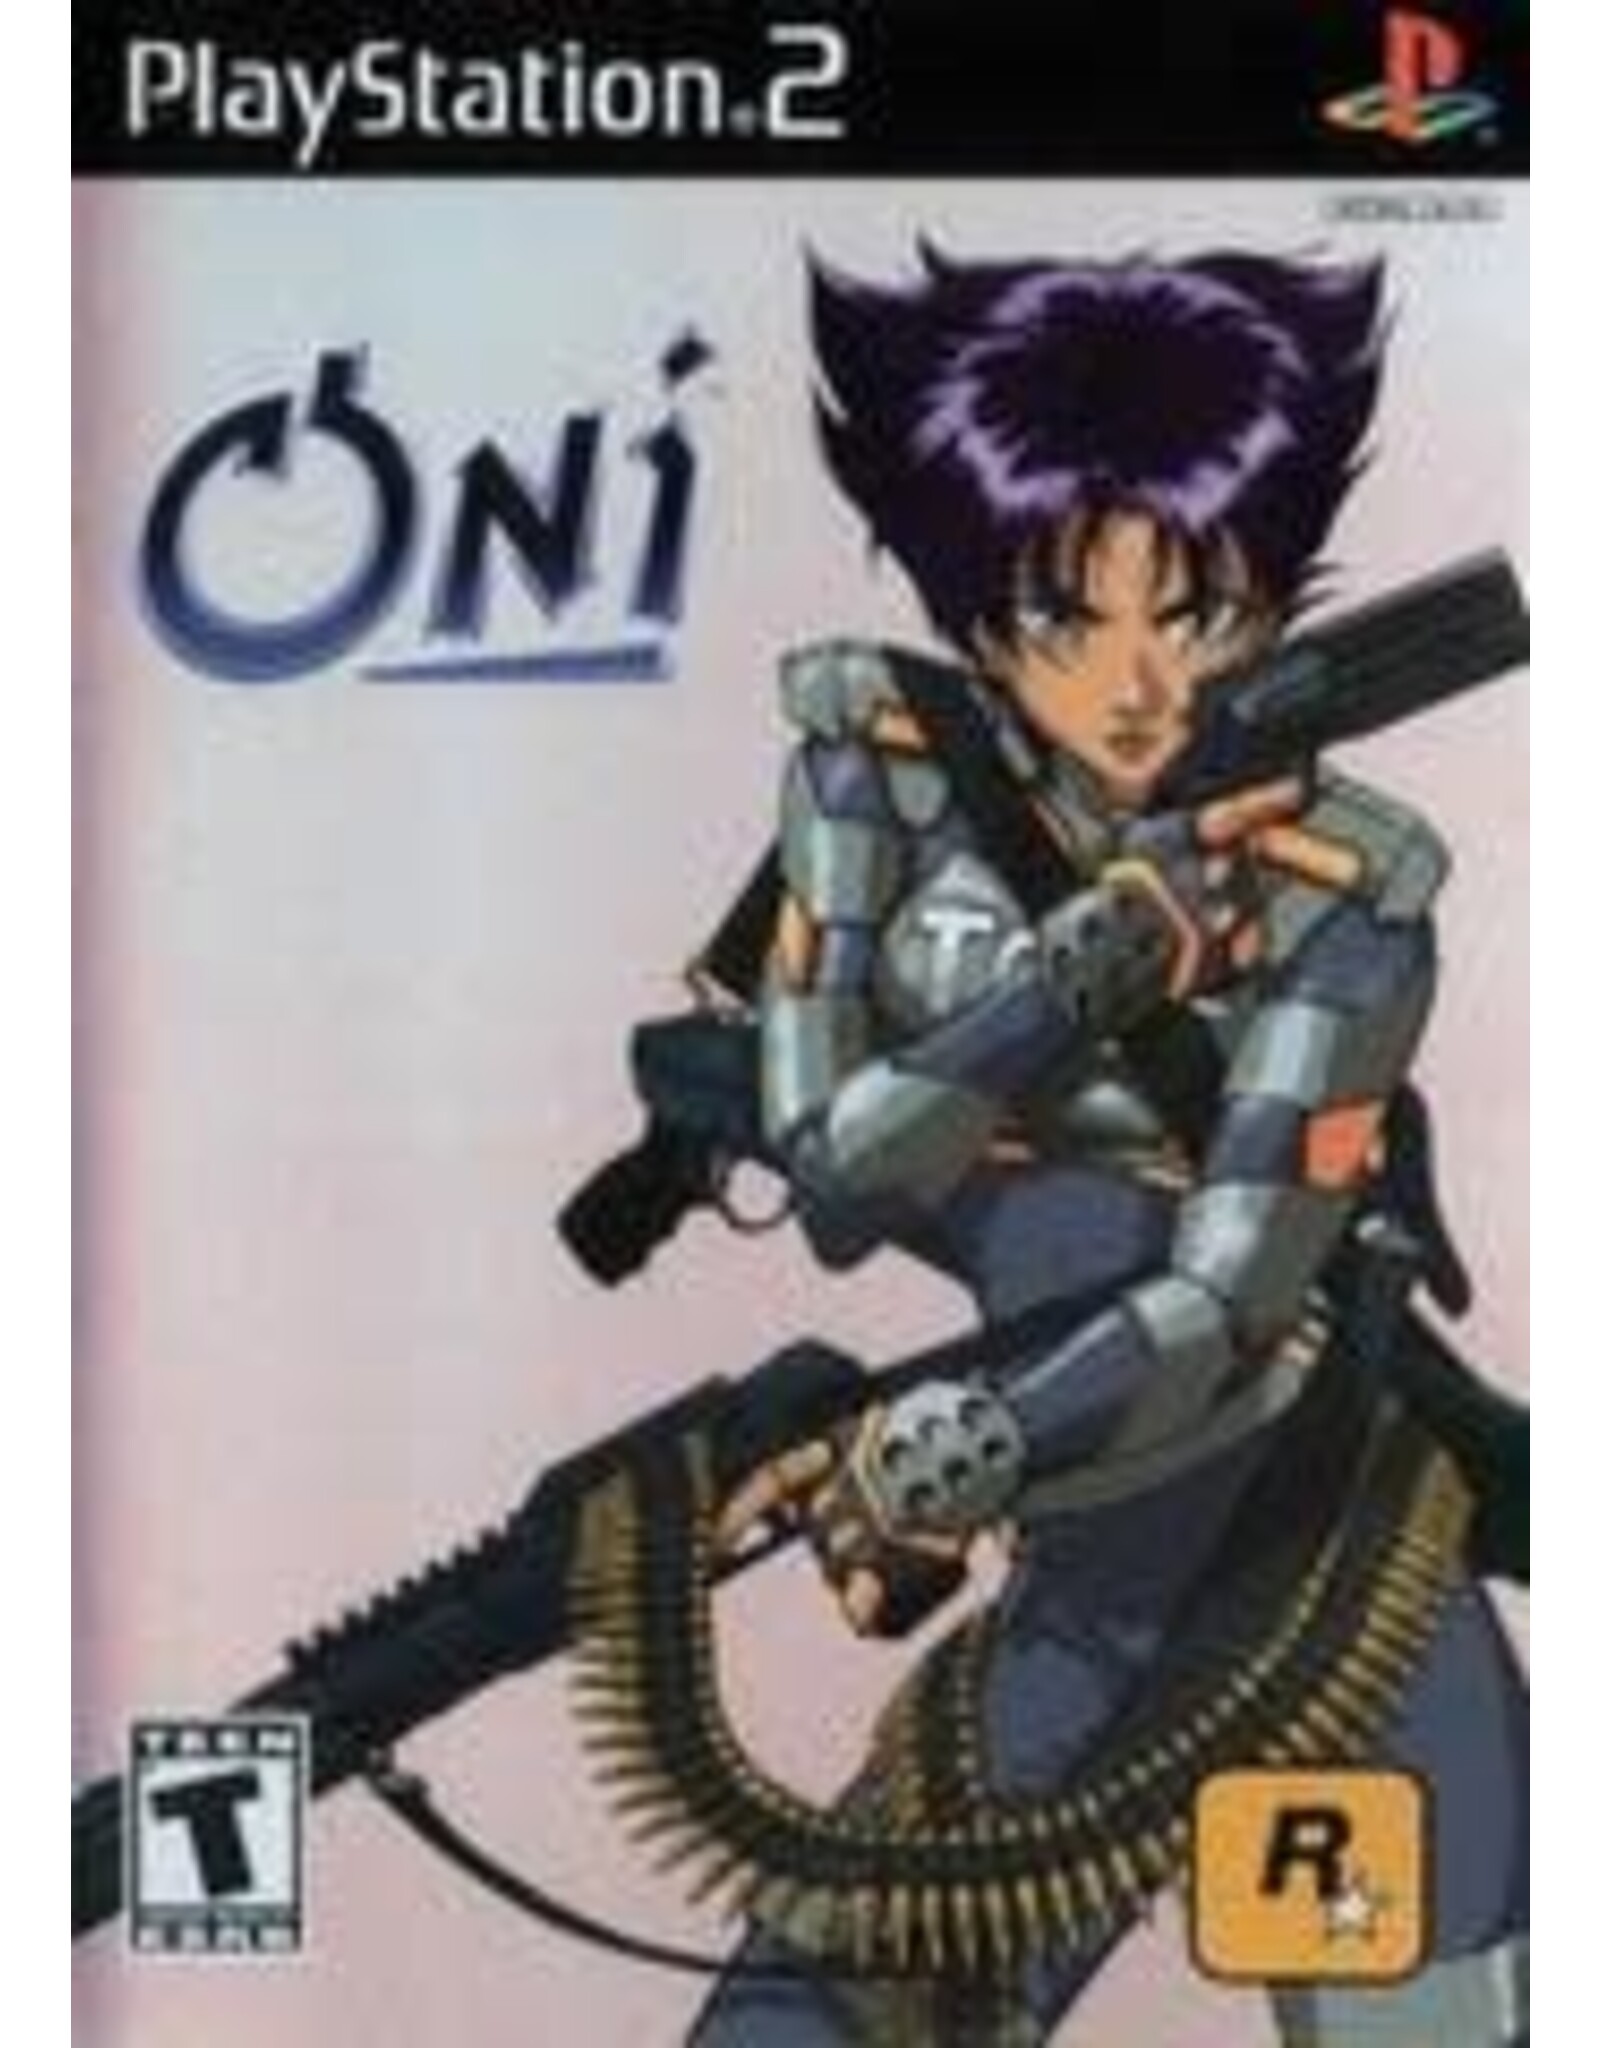 Playstation 2 Oni (Disc Only)